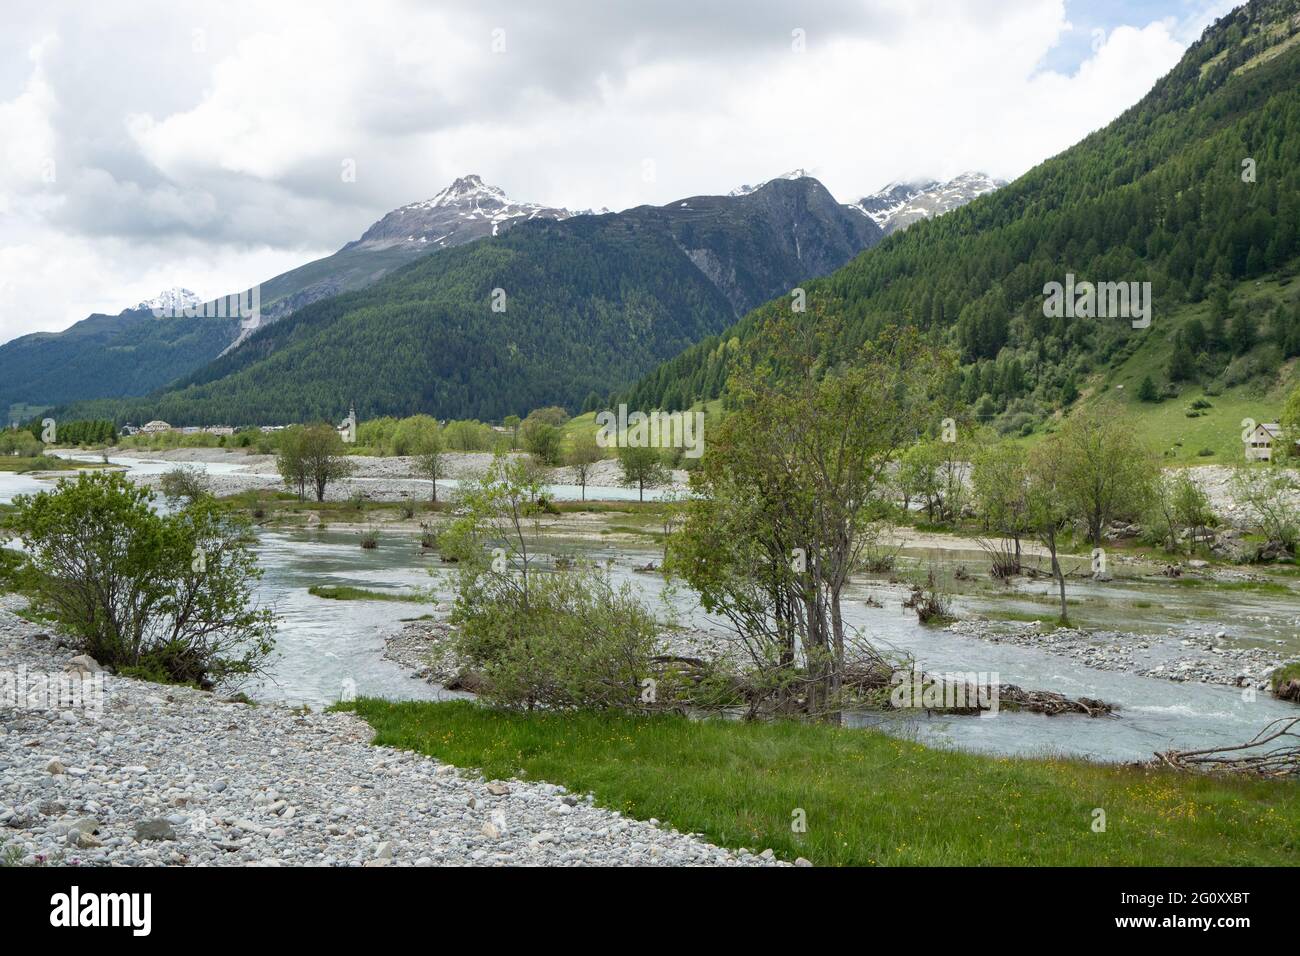 View over a wild Inn river landscape in Engadin, Switzerland, with mountains Stock Photo